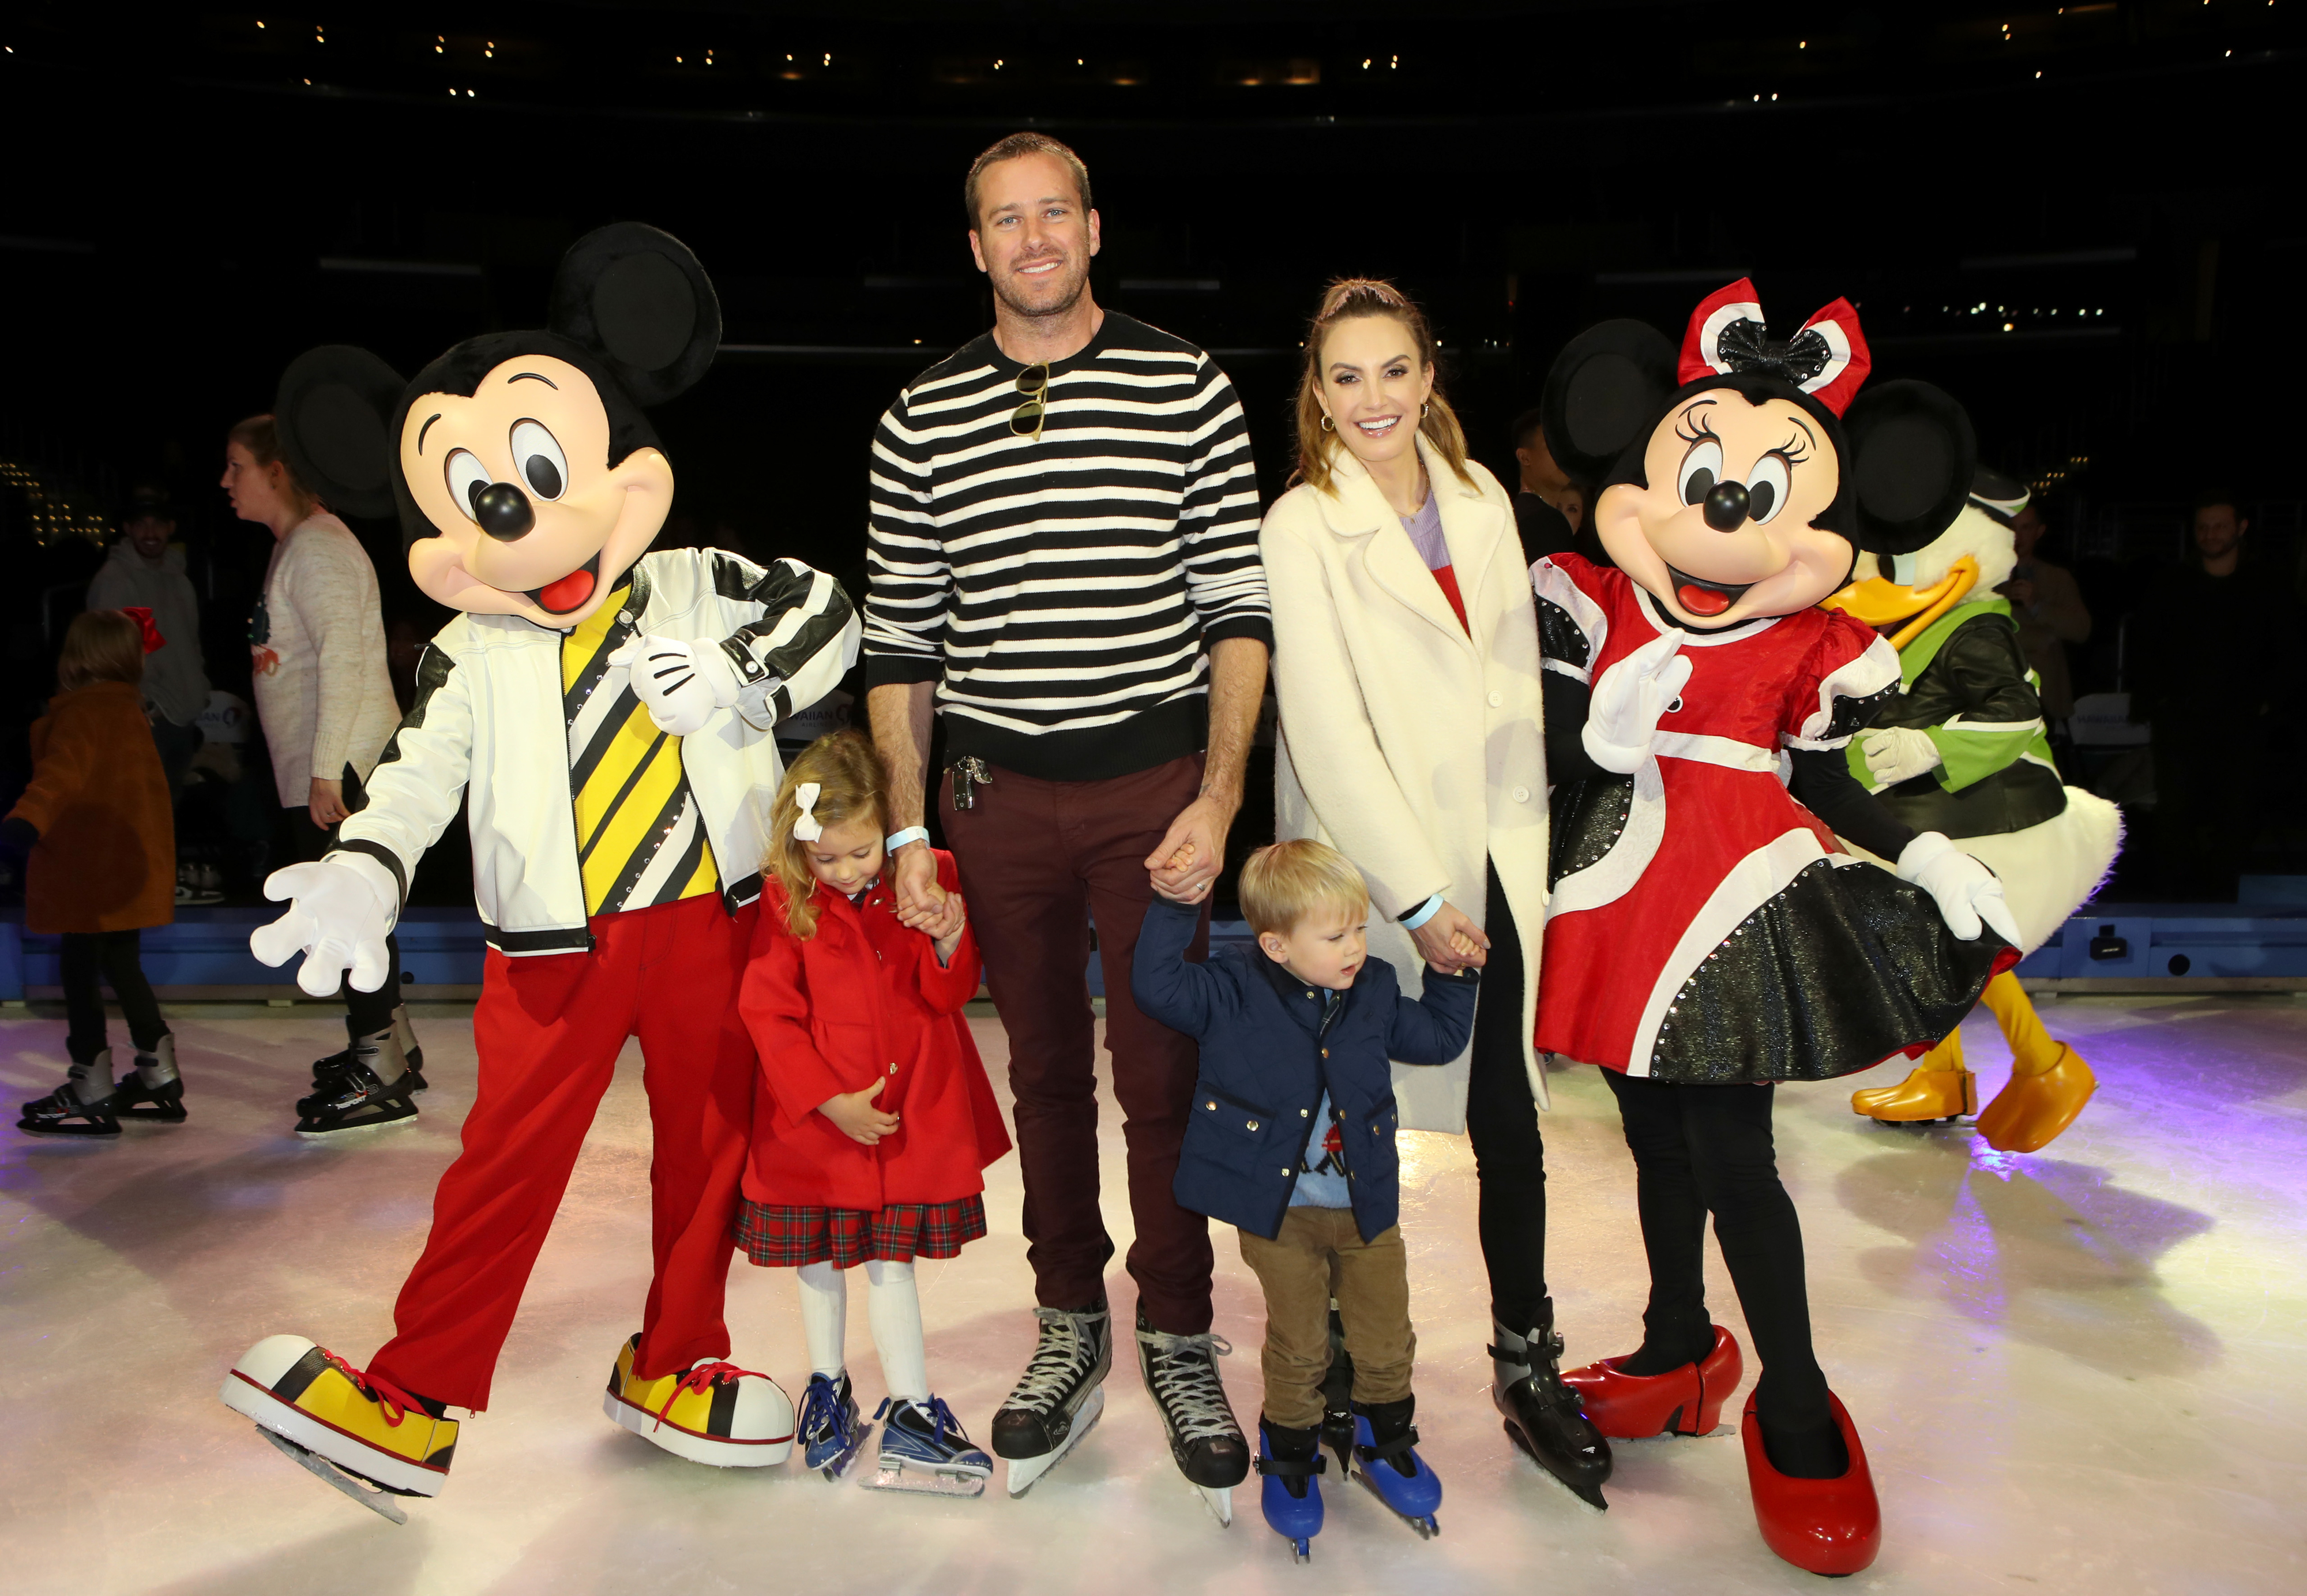 Armie and Elizabeth with Mickey and Minnie Mouse